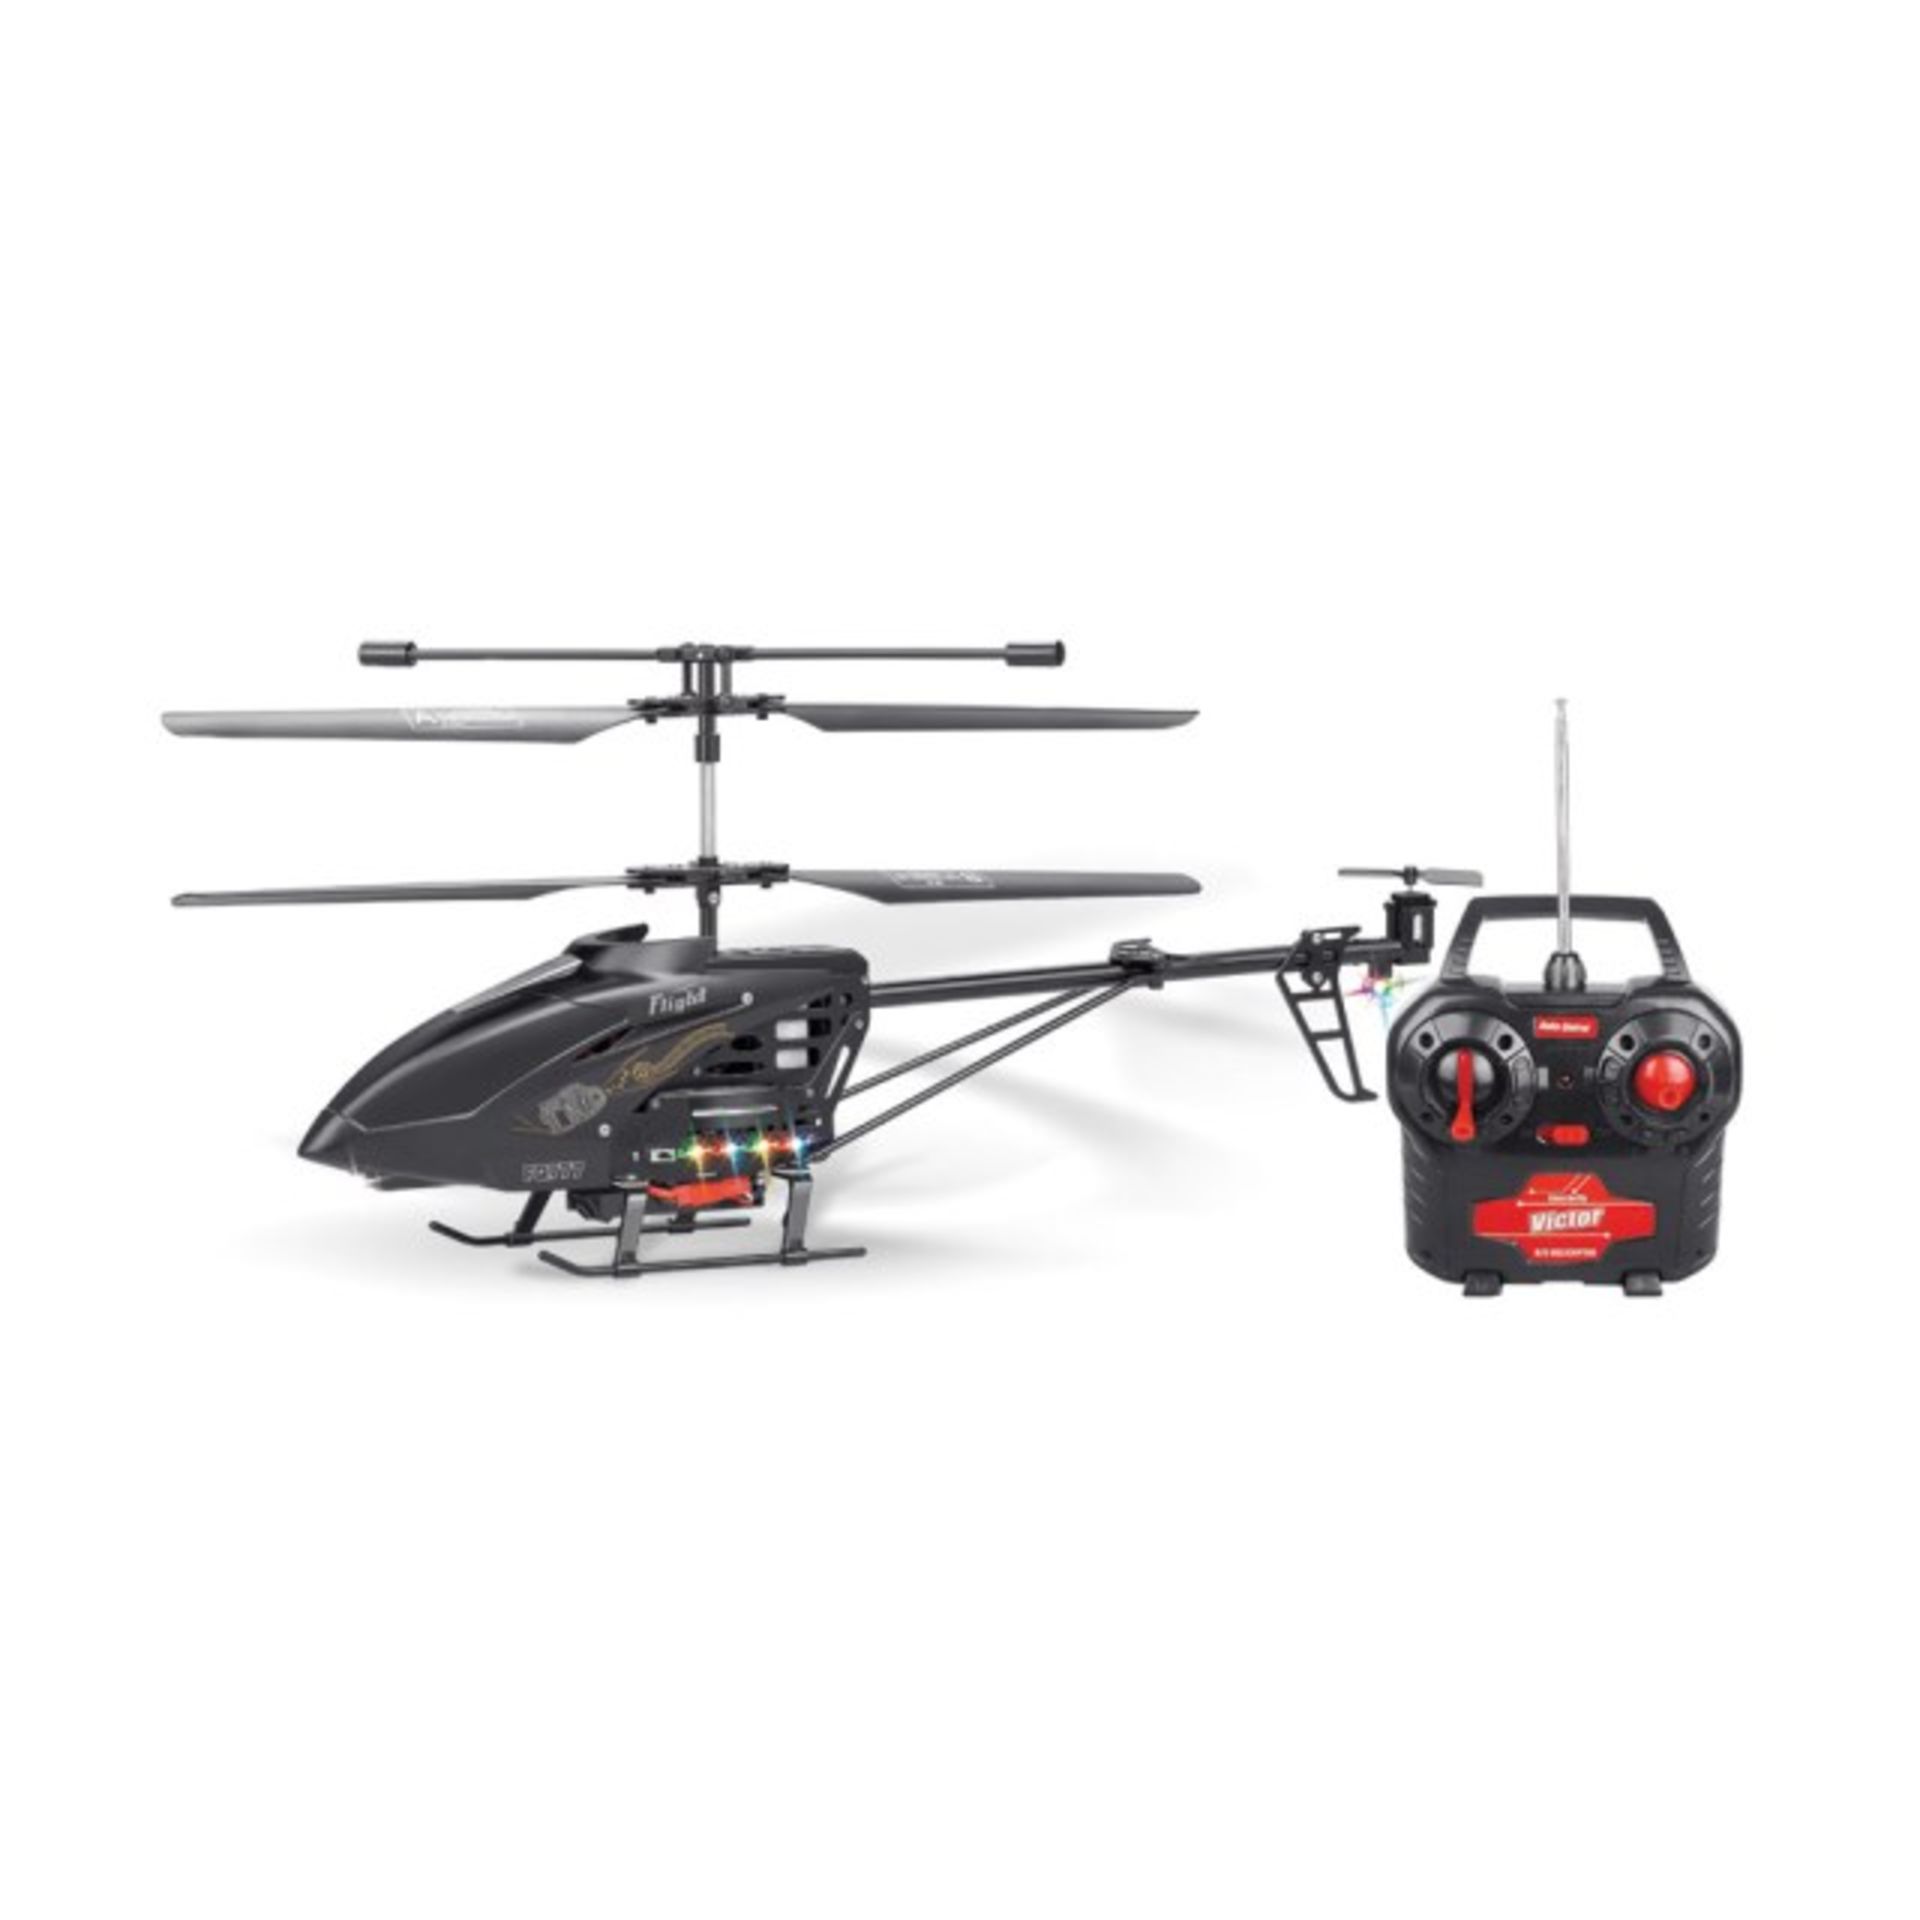 V Shadow Hawk Spy Helicopter With Built In Micro Photo & Video Camera, Lights,Includes SD Card To - Image 2 of 2